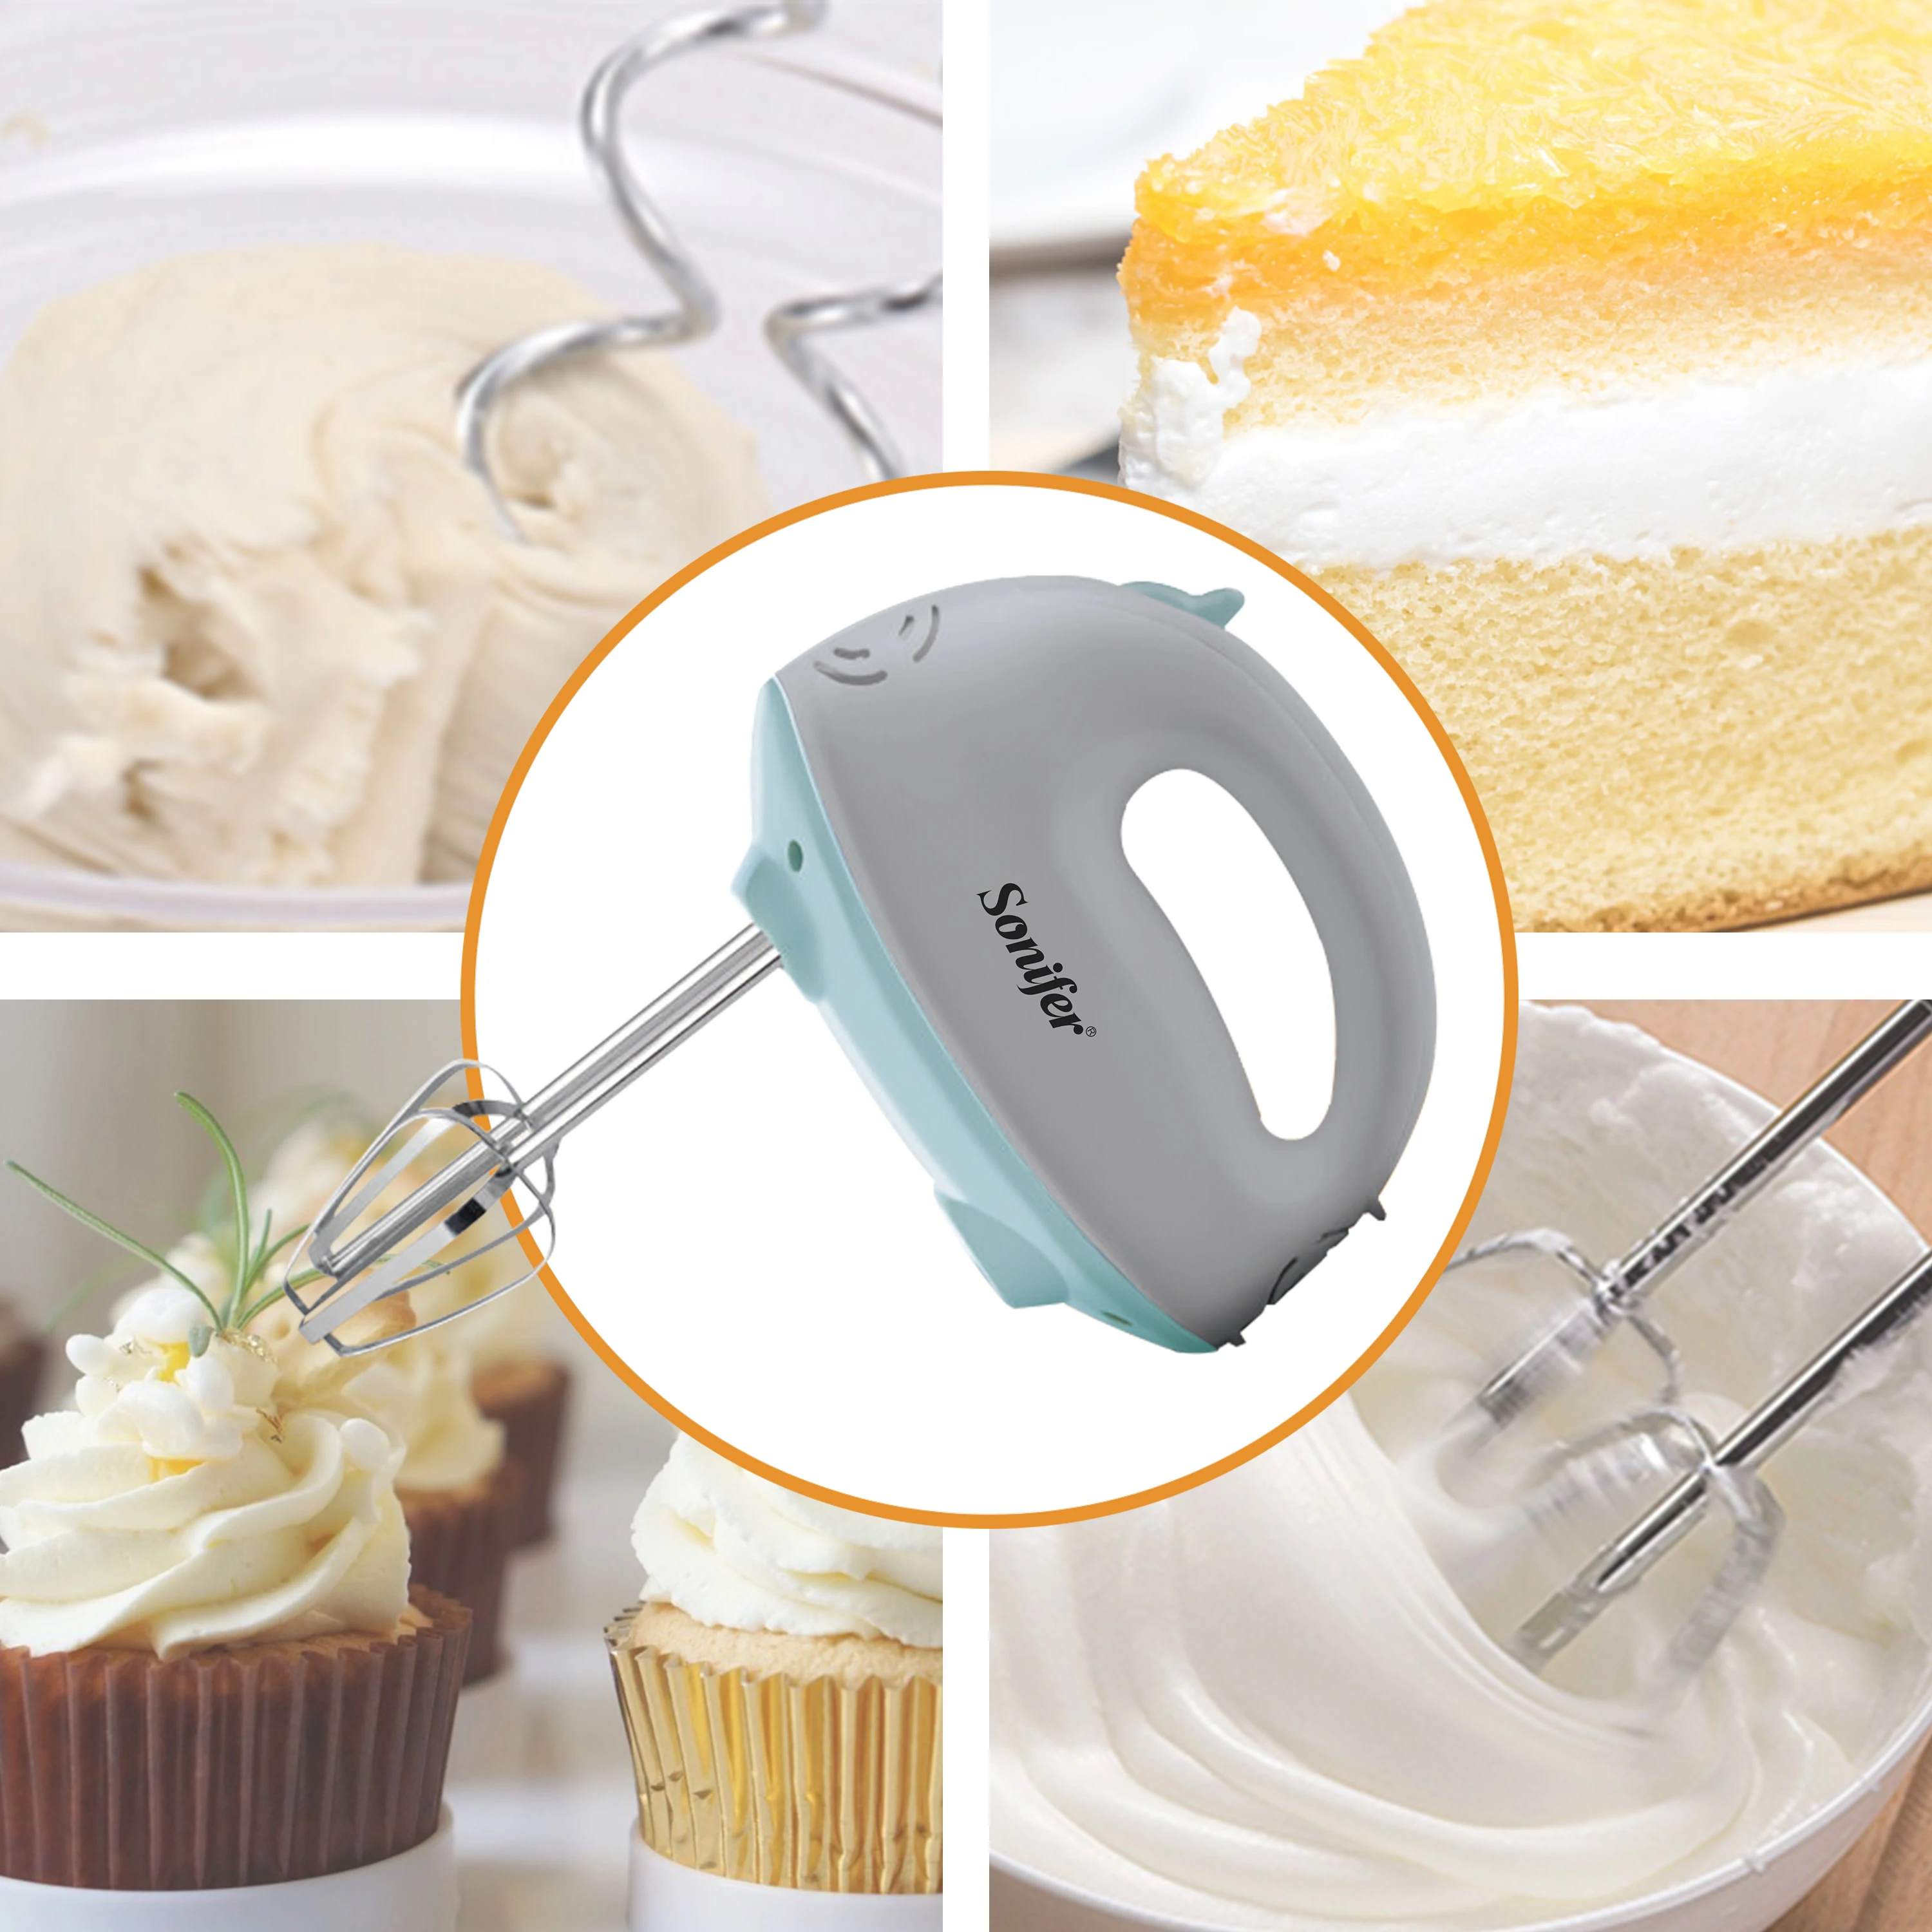 https://ae01.alicdn.com/kf/Seccebfaf61e149d08d36563465afb688F/Hand-Mixer-Electric-Blender-Kitchen-Appliances-Dough-Mixer-Egg-Beater-Portable-For-The-Meat-Bakery-Cake.jpg